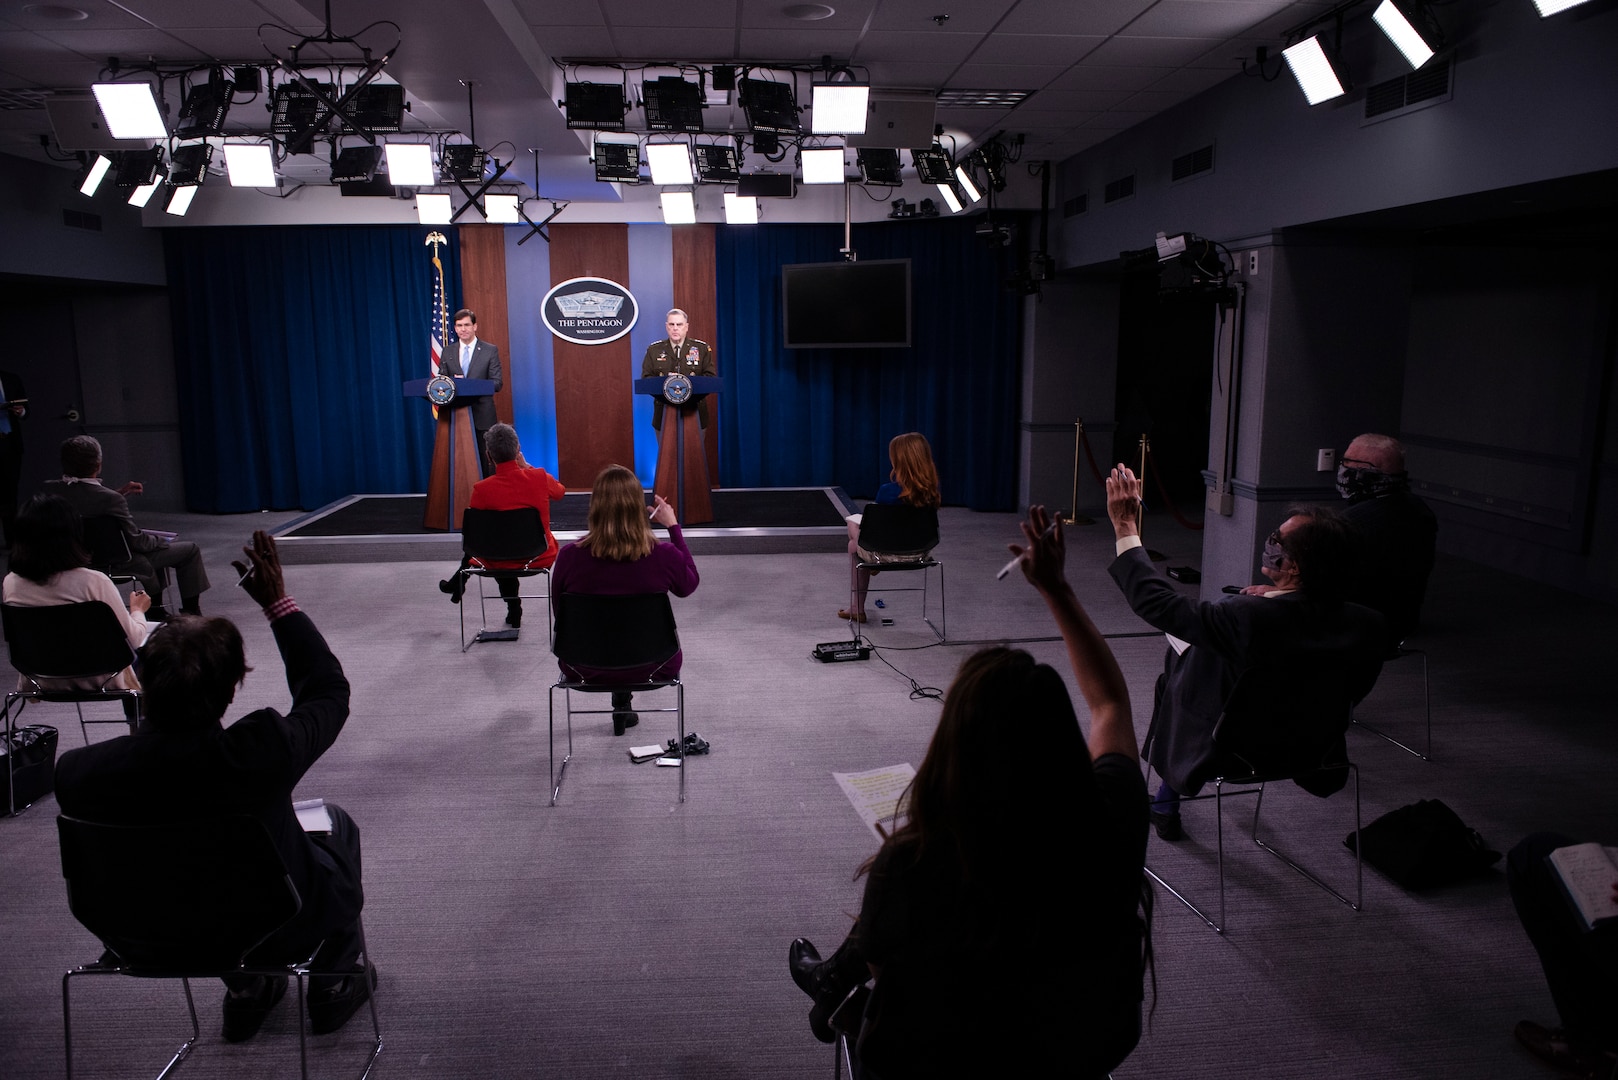 Socially distanced reporters raise their hands at a news conference.